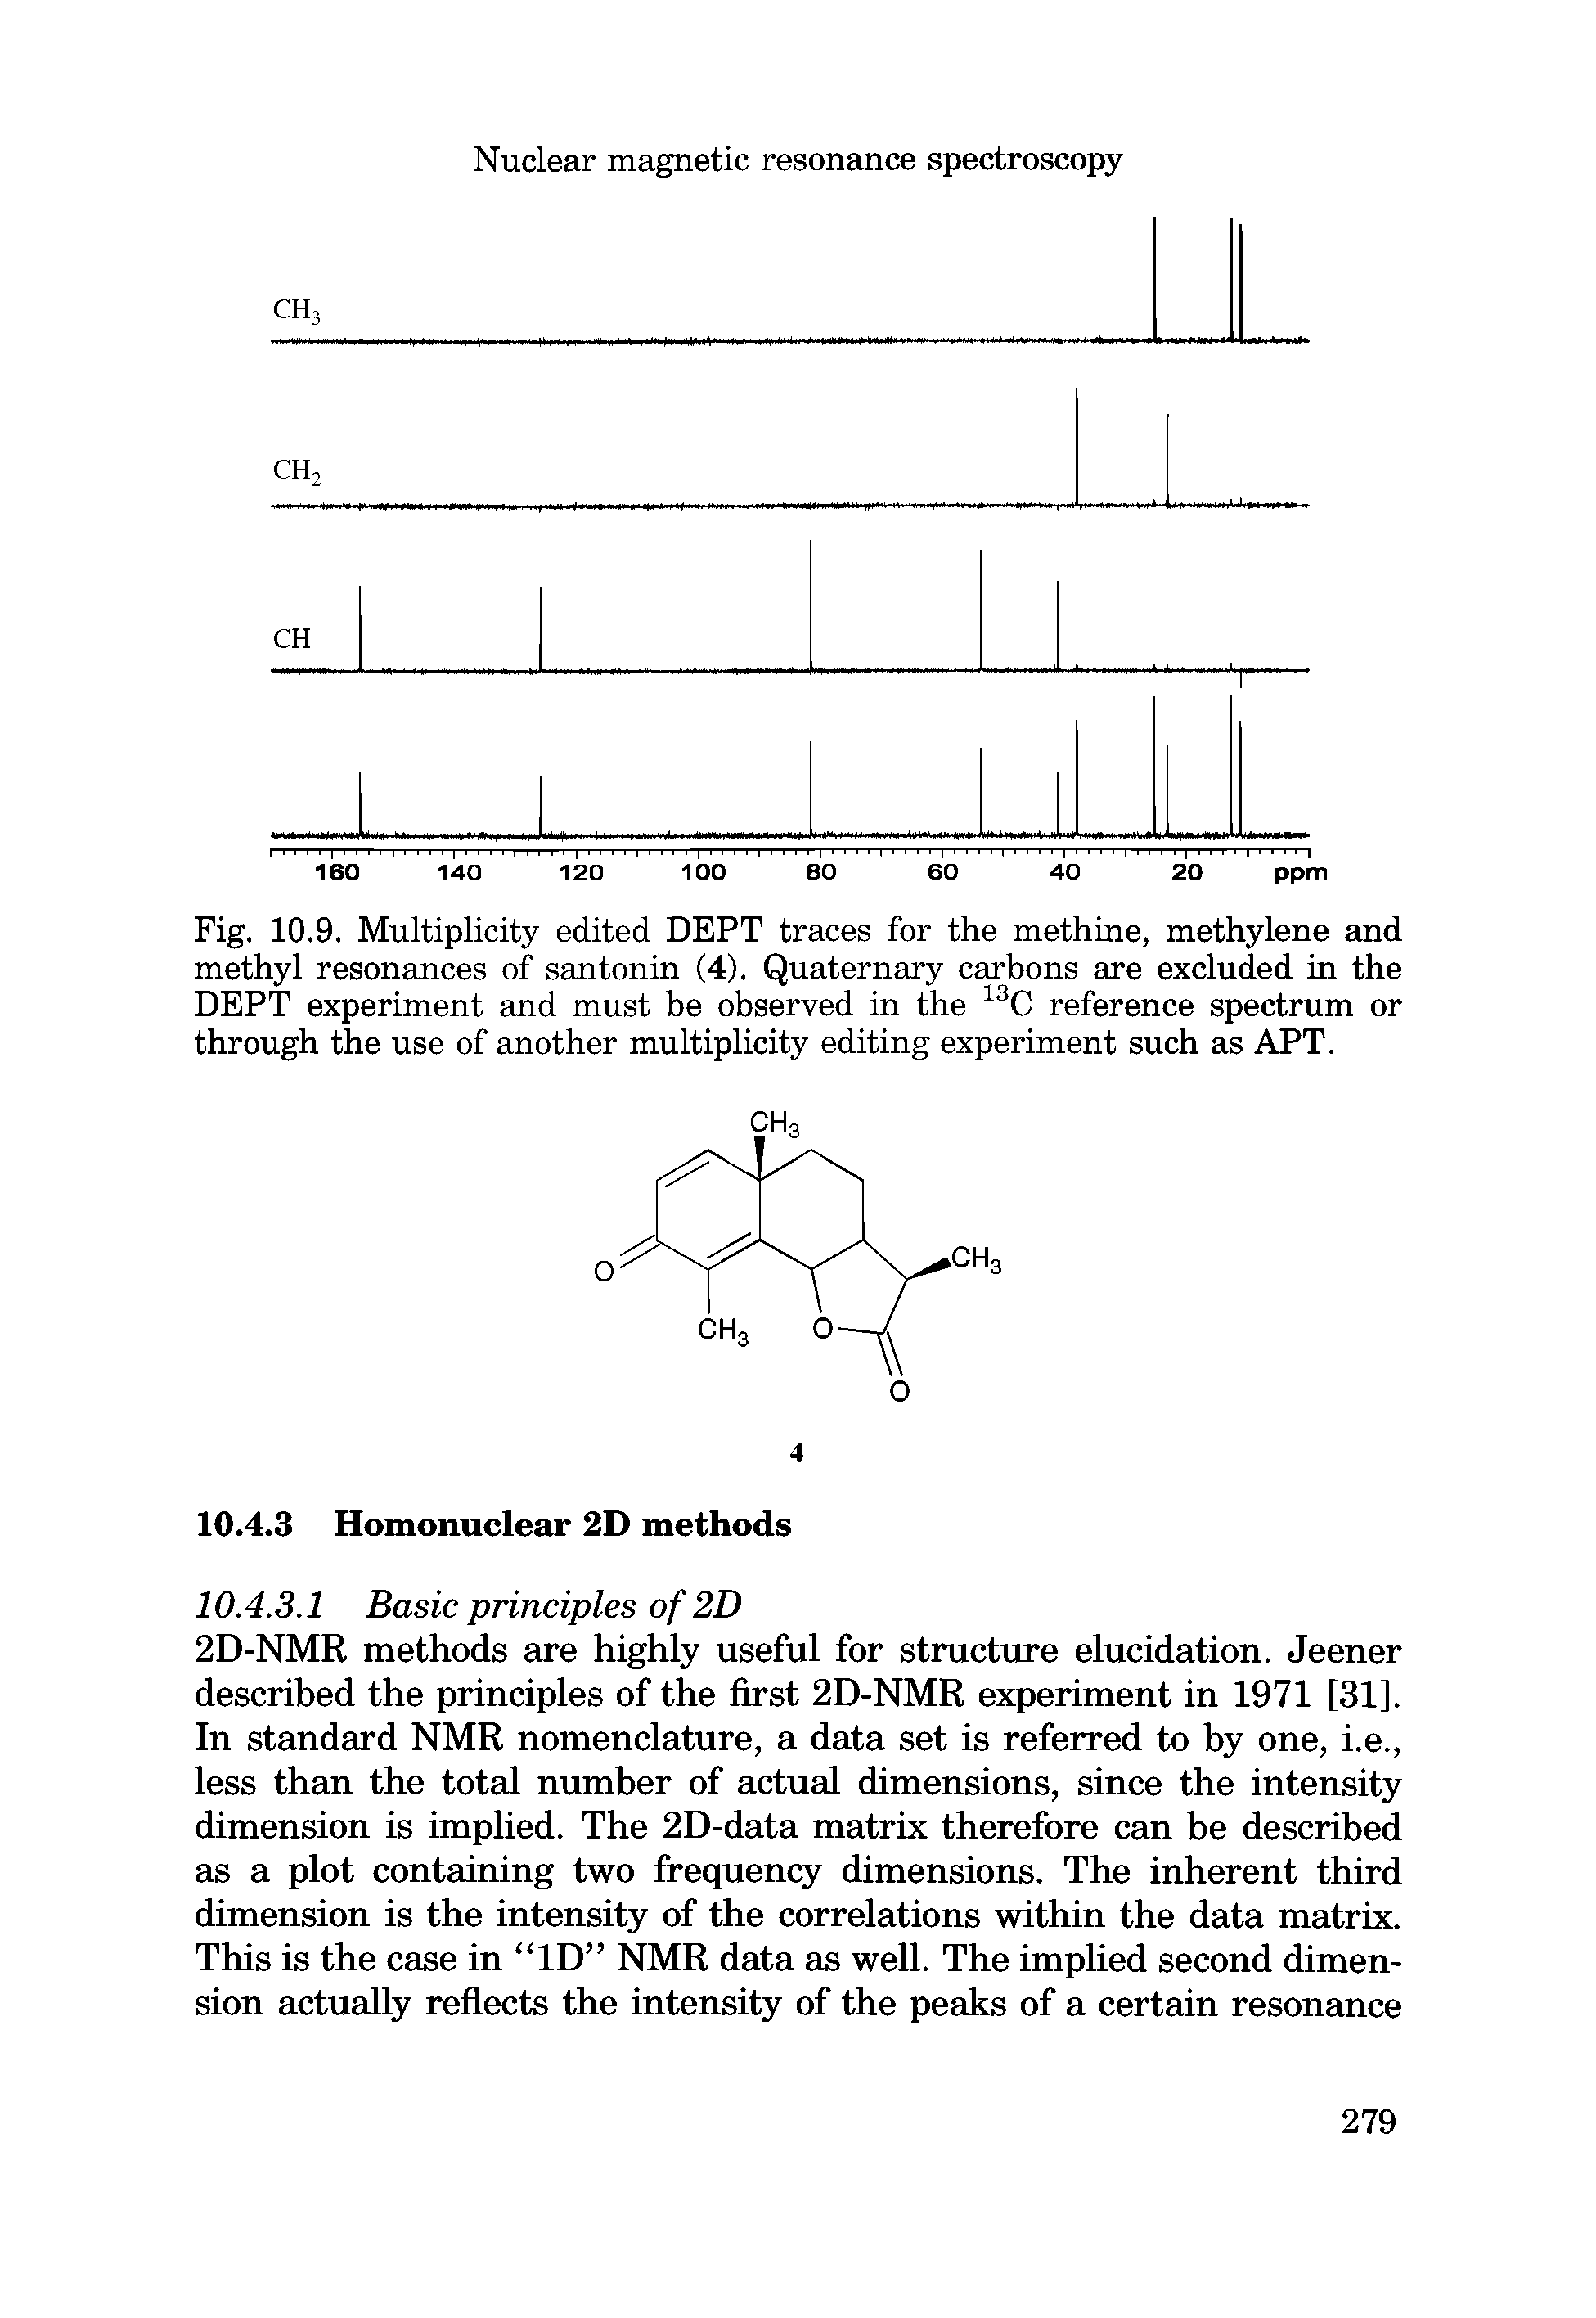 Fig. 10.9. Multiplicity edited DEPT traces for the methine, methylene and methyl resonances of santonin (4). Quaternary carbons are excluded in the DEPT experiment and must be observed in the 13C reference spectrum or through the use of another multiplicity editing experiment such as APT.